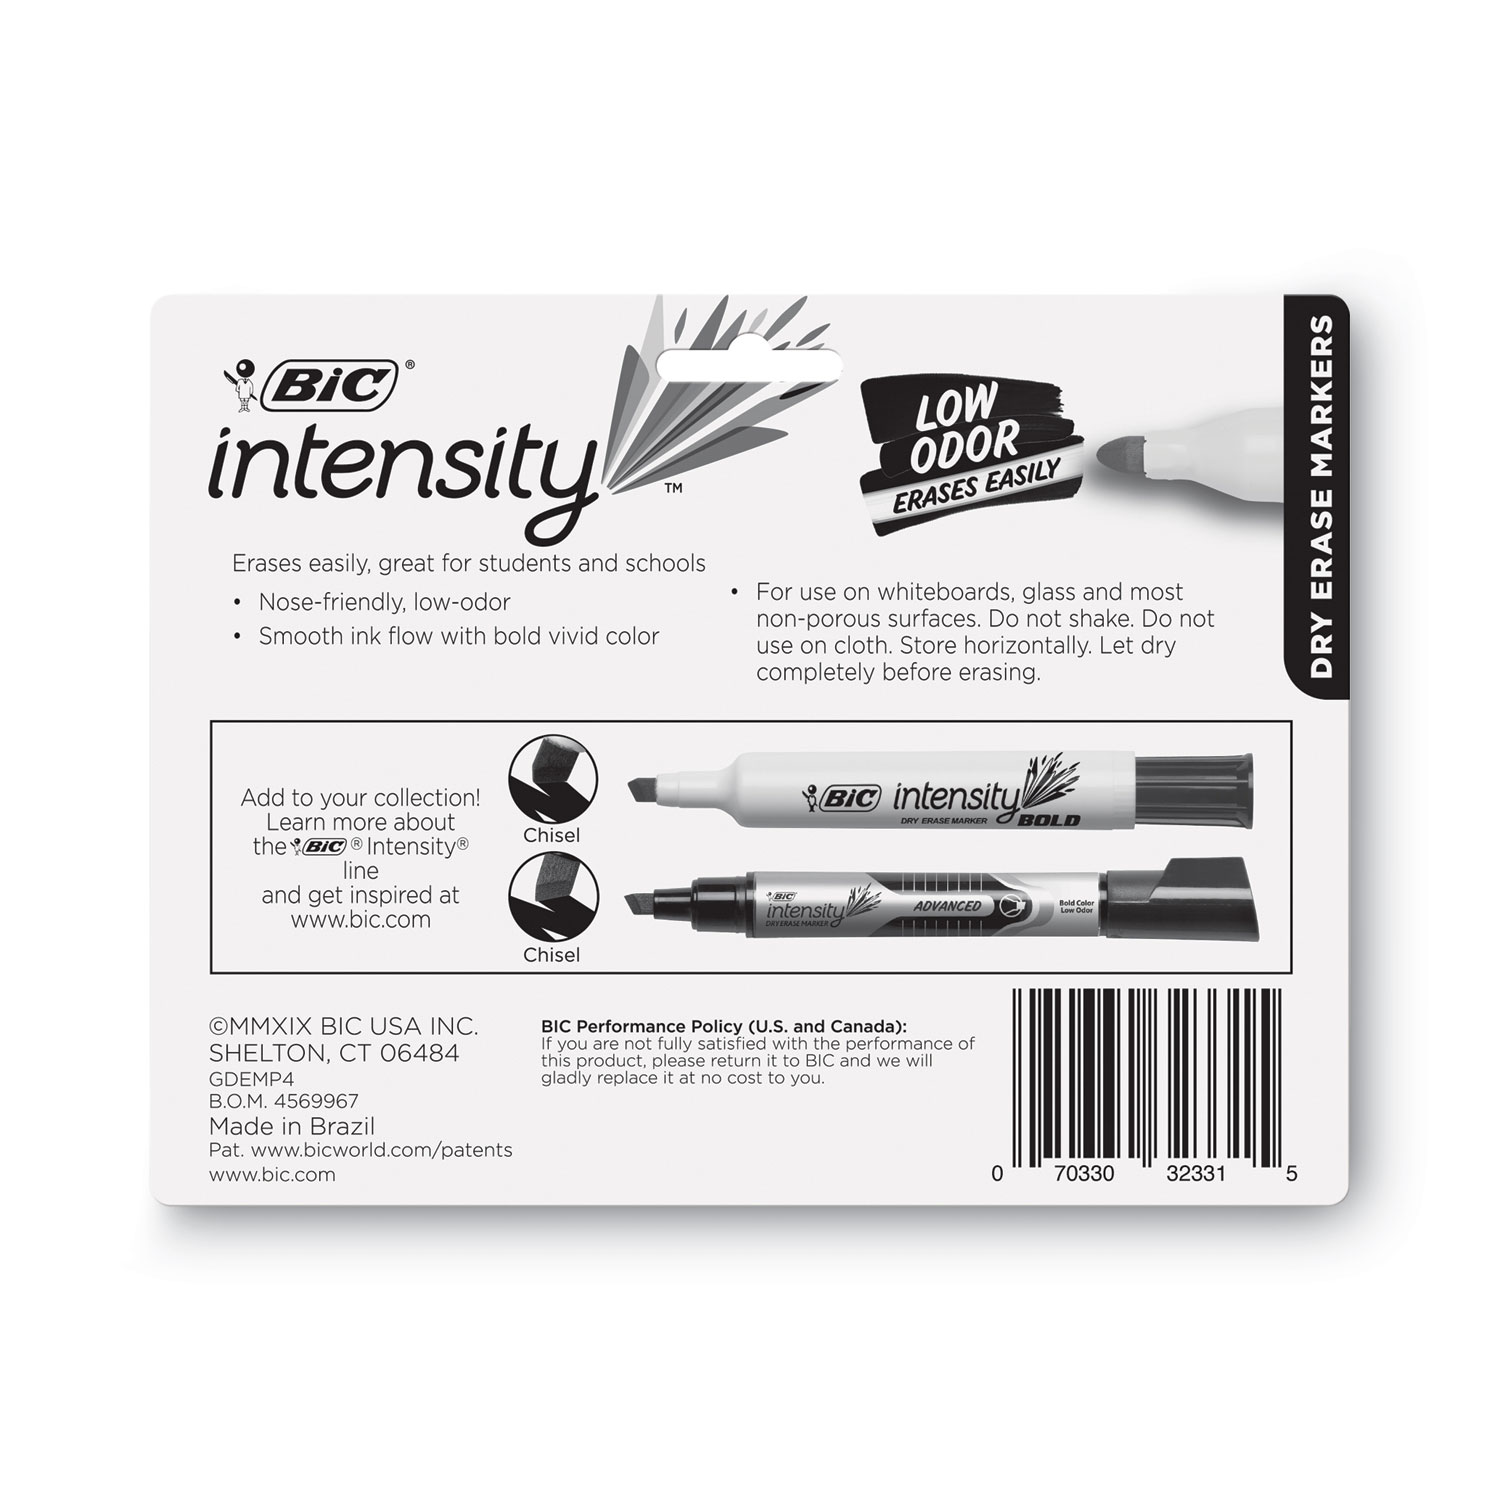 Bic Low Odor and Bold Writing Dry Erase Marker, Chisel Tip, Assorted